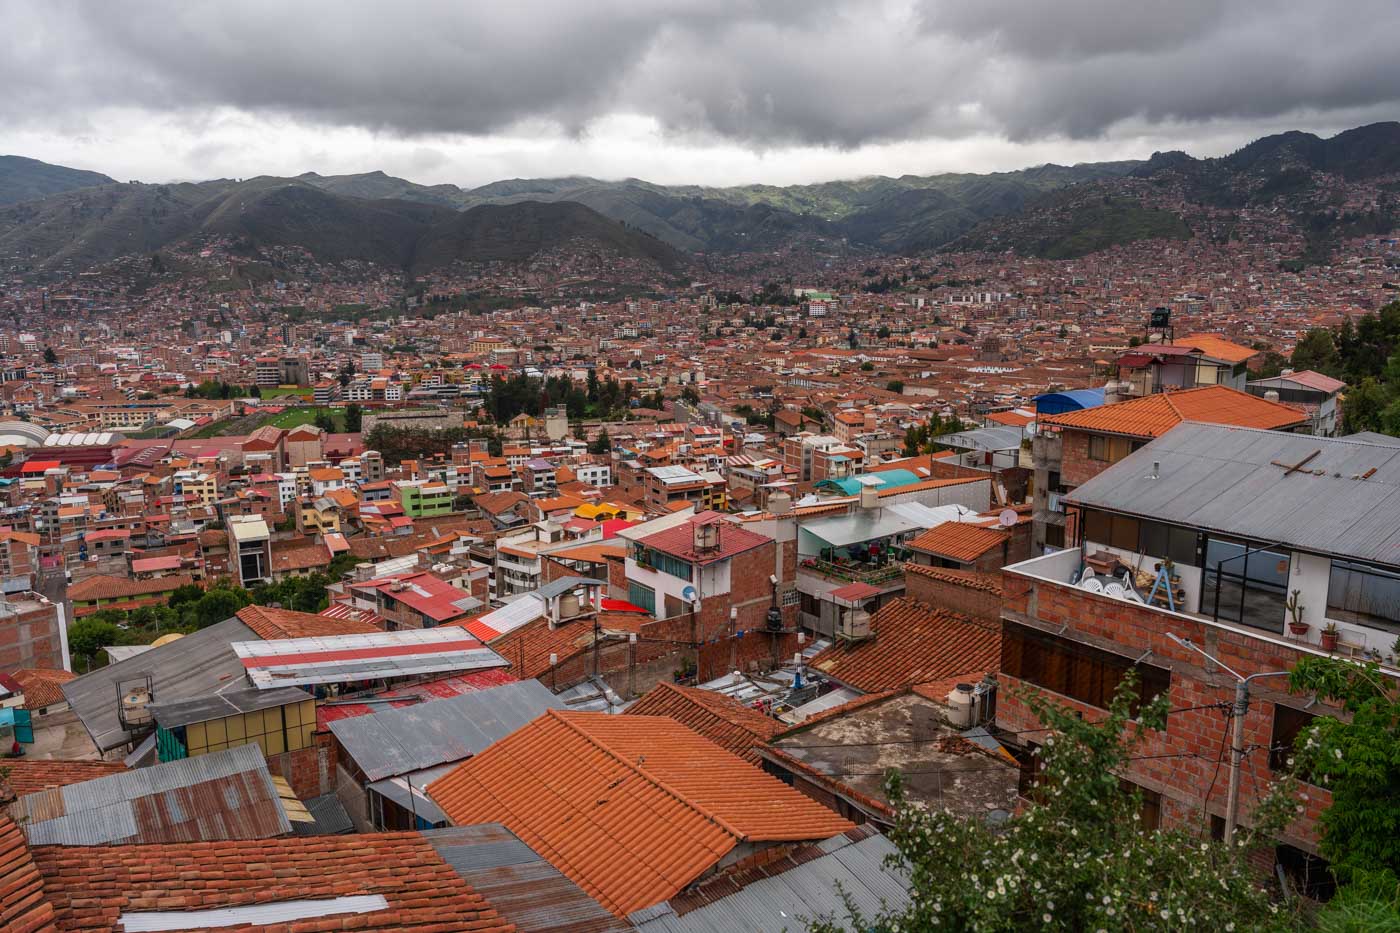 A view over Cusco city on an overcast day seen from the upper area of the San Blas neighborhood.